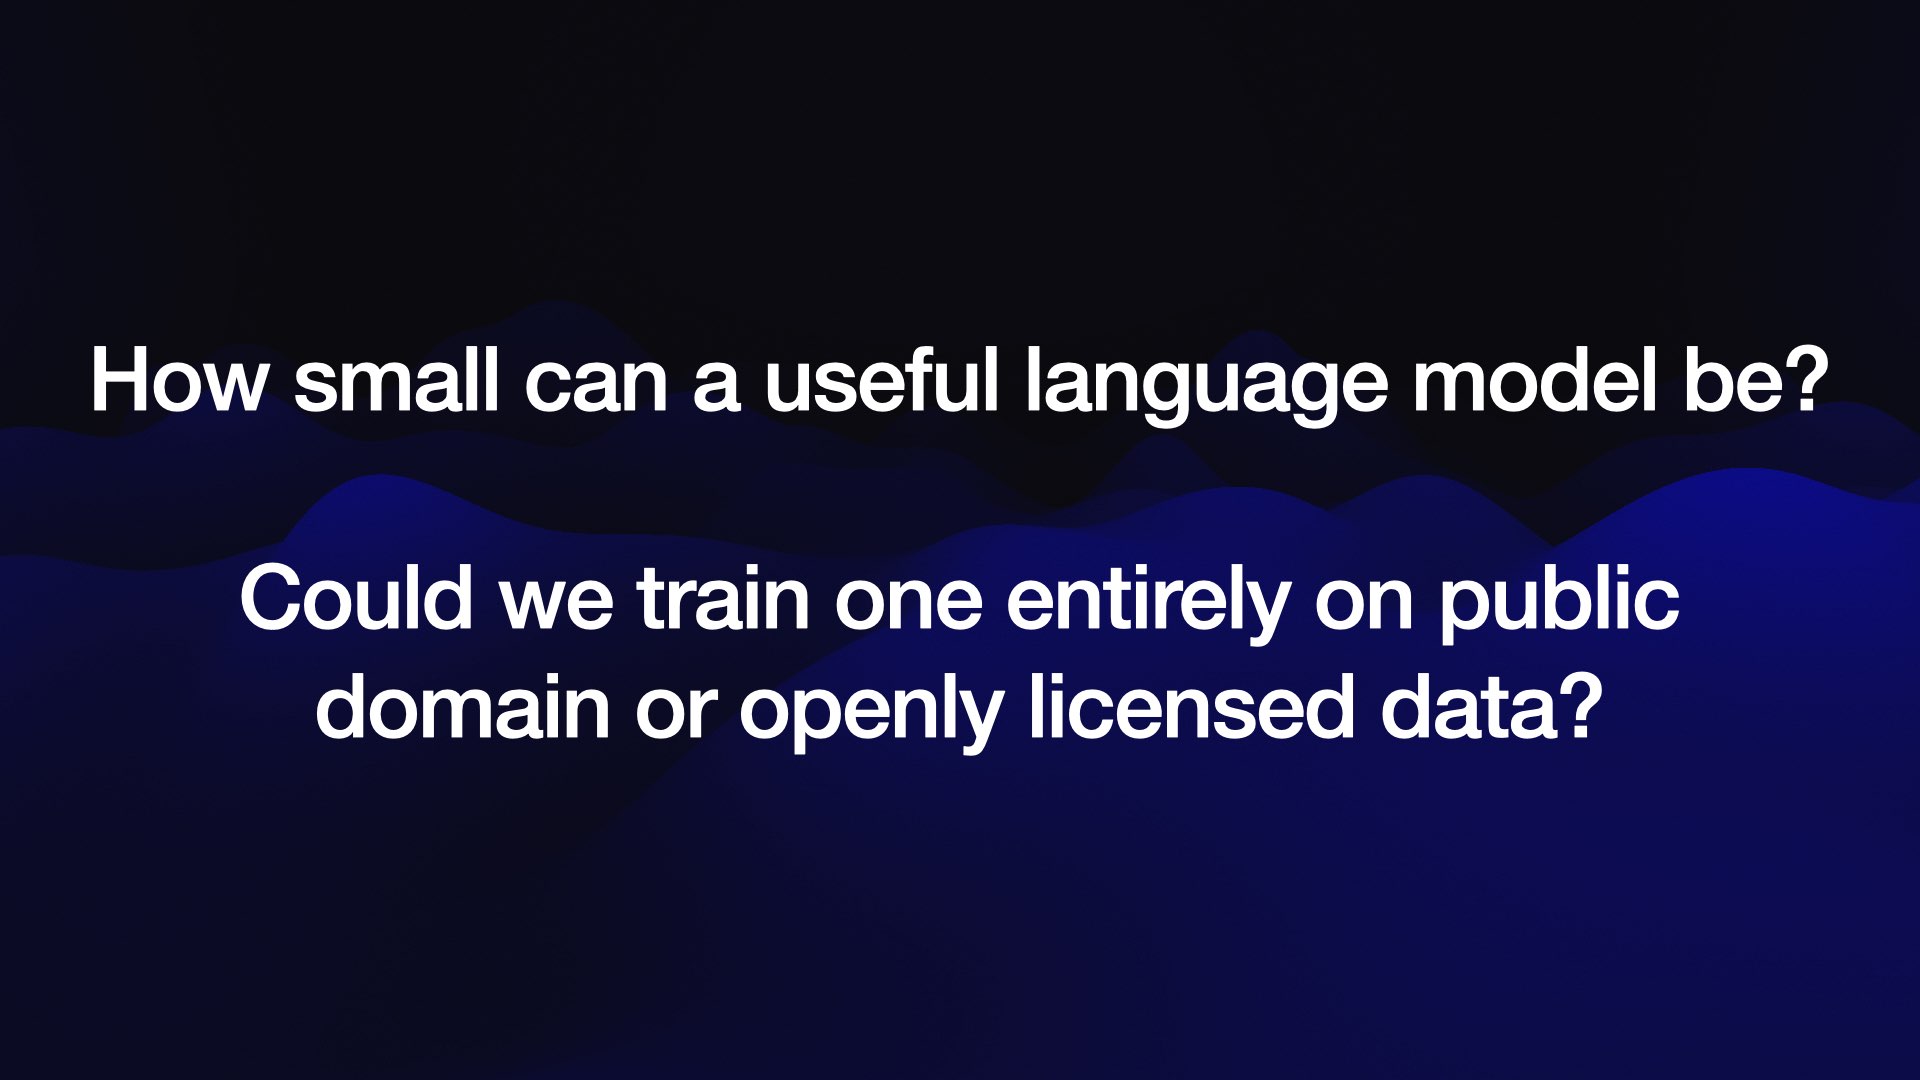 Could we train one entirely on public domain or openly licensed data?